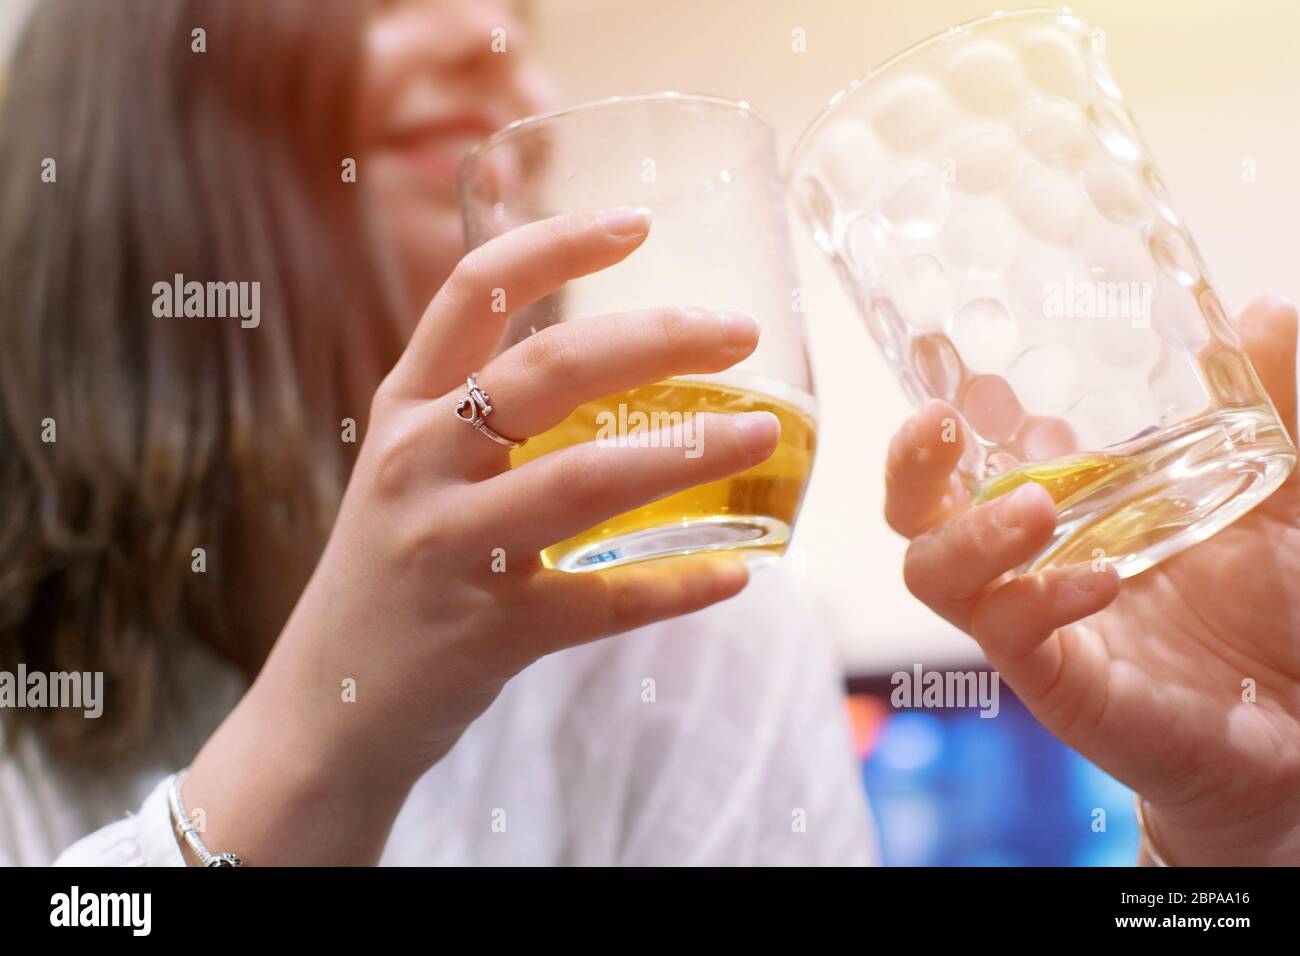 Drink craft beer with a friend, clink glasses. Two hands holding two glasses of beers Friendship concept. Young cute girl friends holding glasses toge Stock Photo